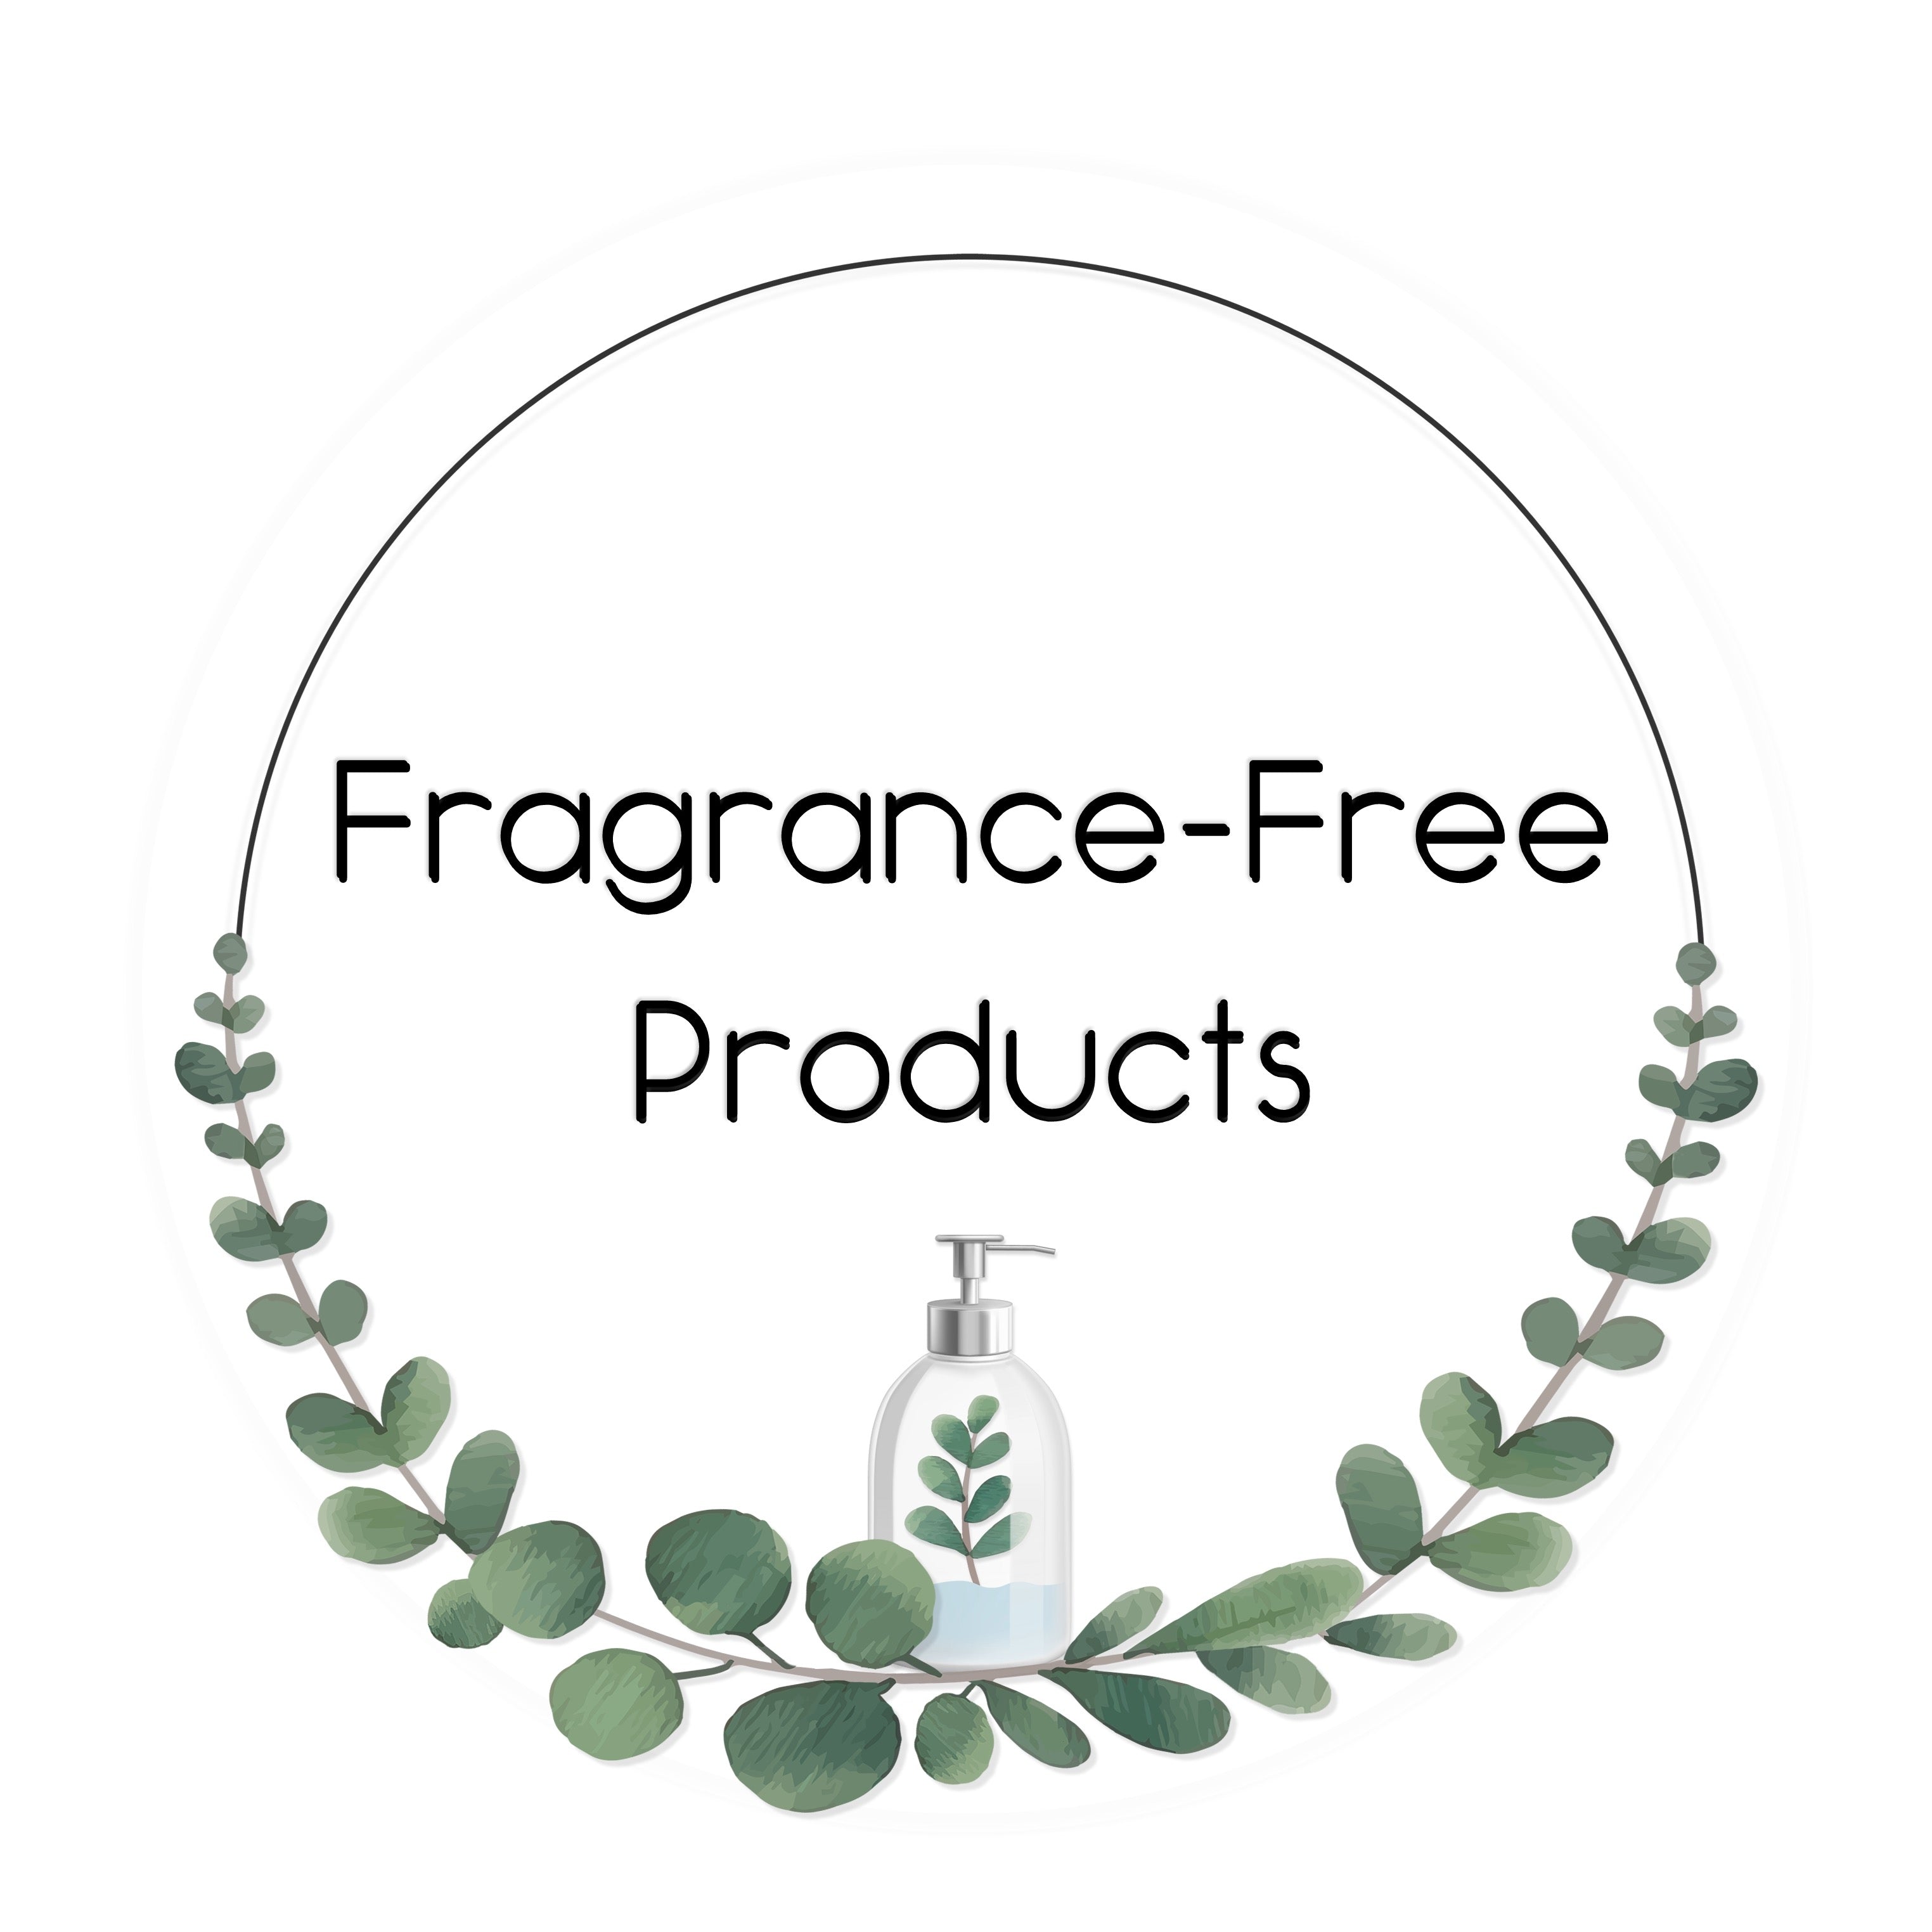 Fragrance-Free Products